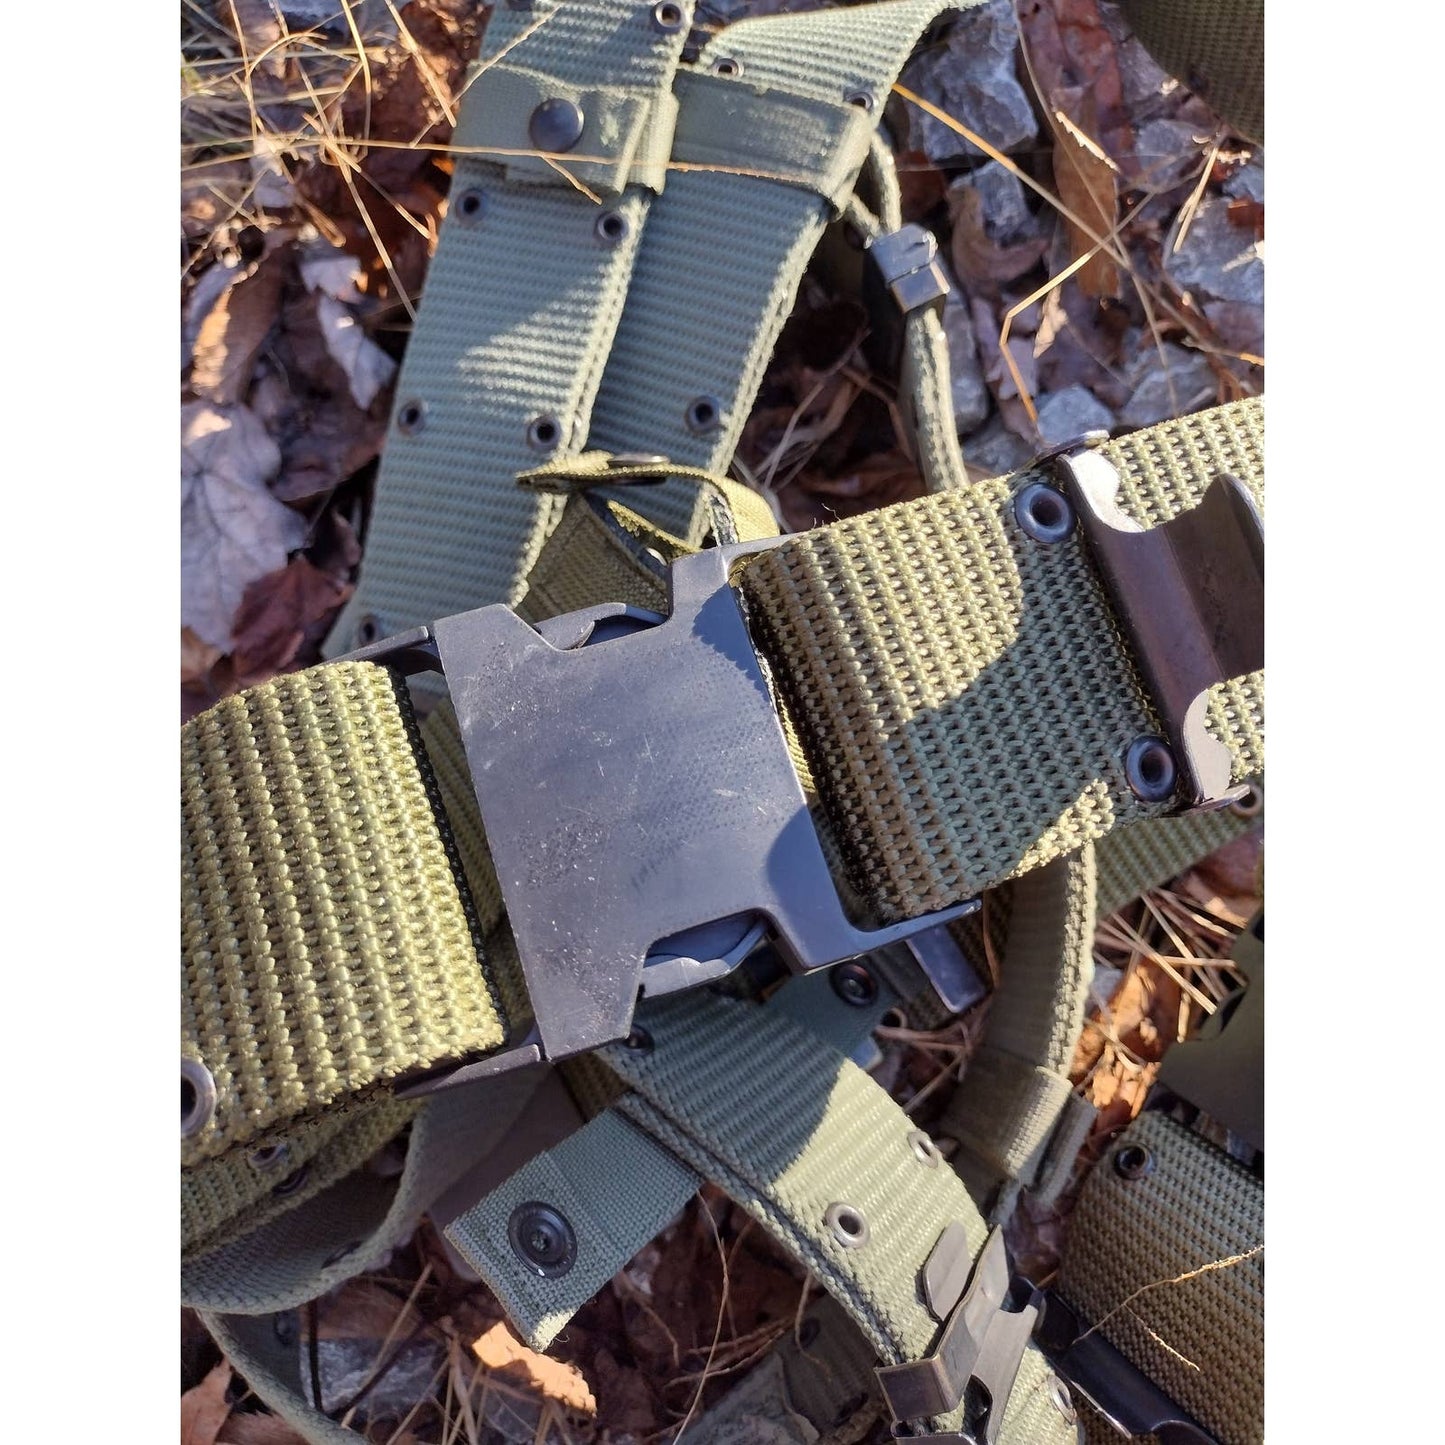 US Army Pistol Belt LC-2 (Alice system) | FREE Shipping!